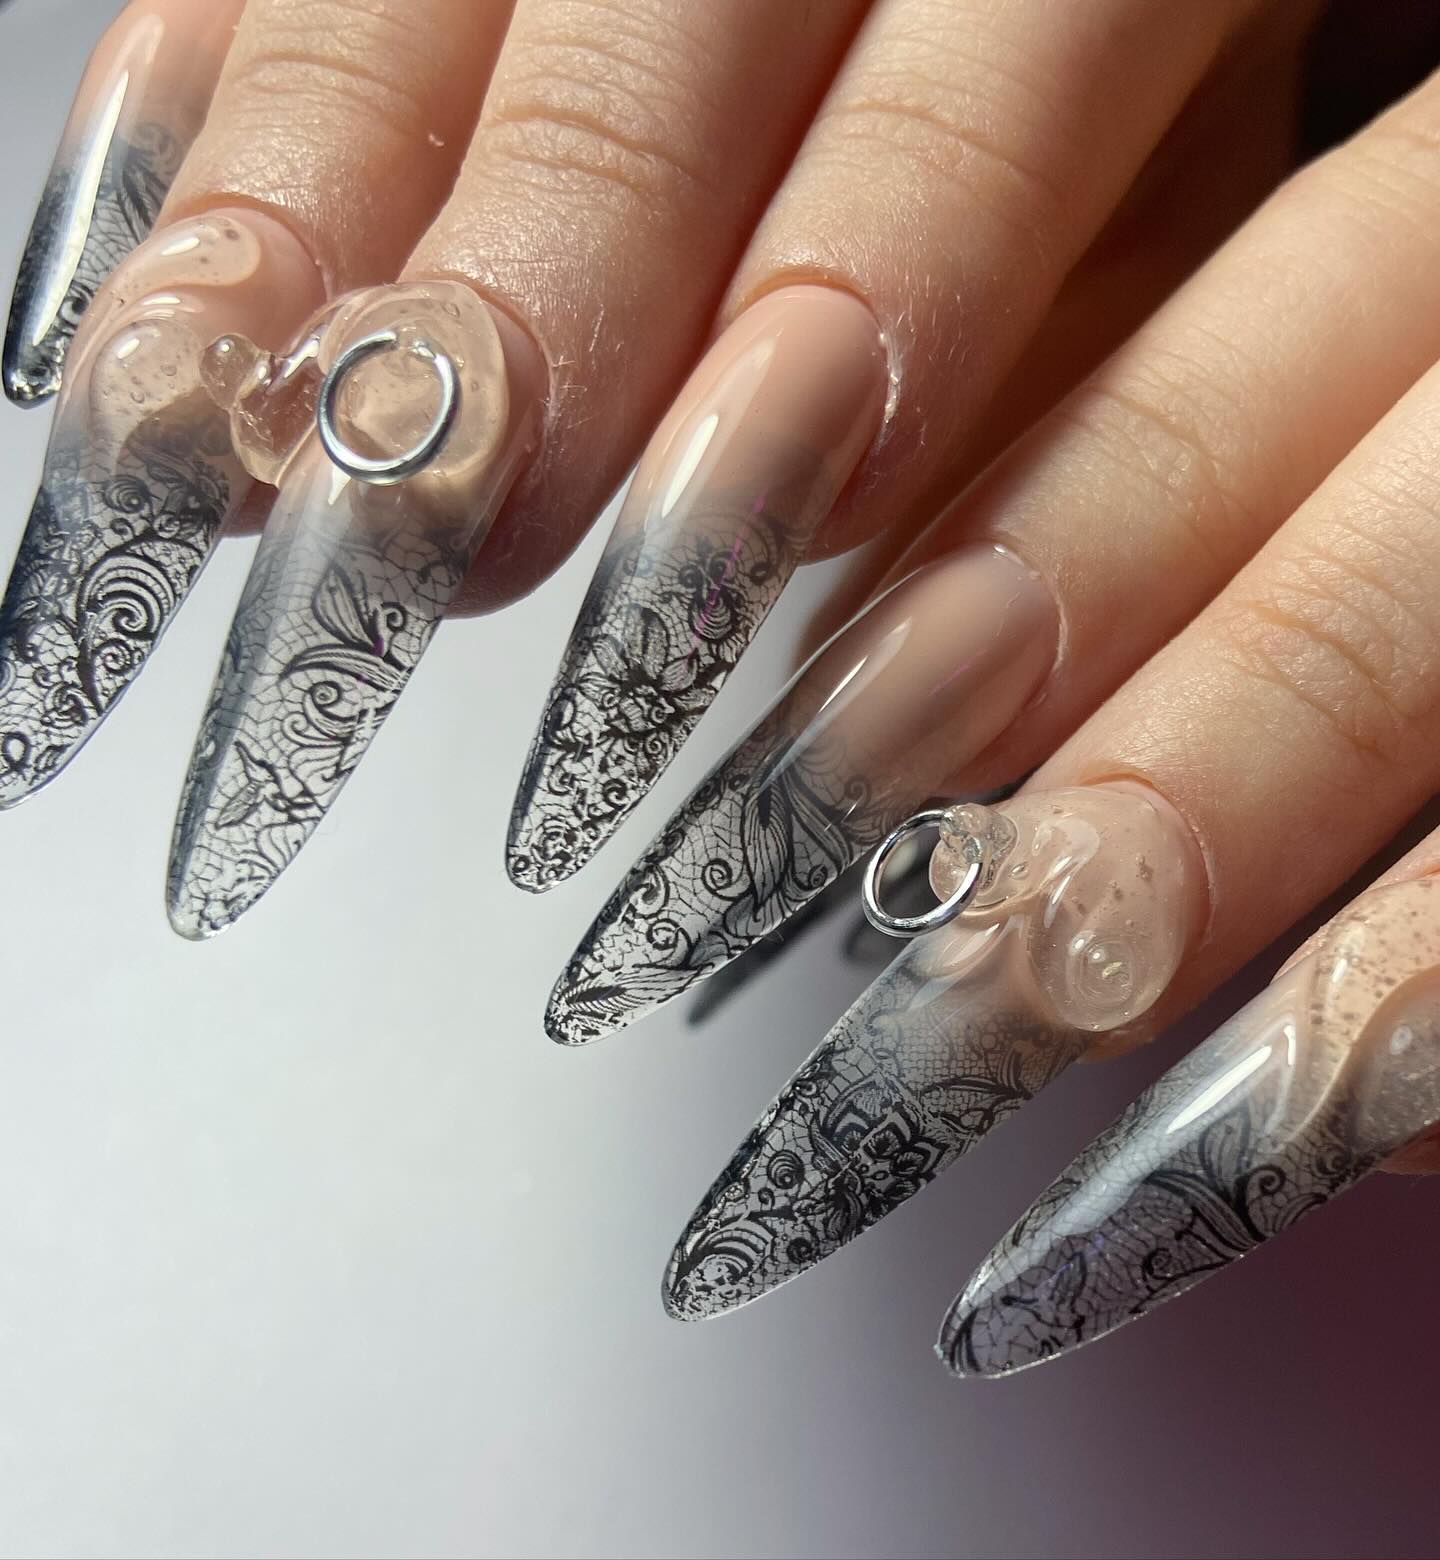 Elegant Lace Design on Stiletto Nails with Piercings